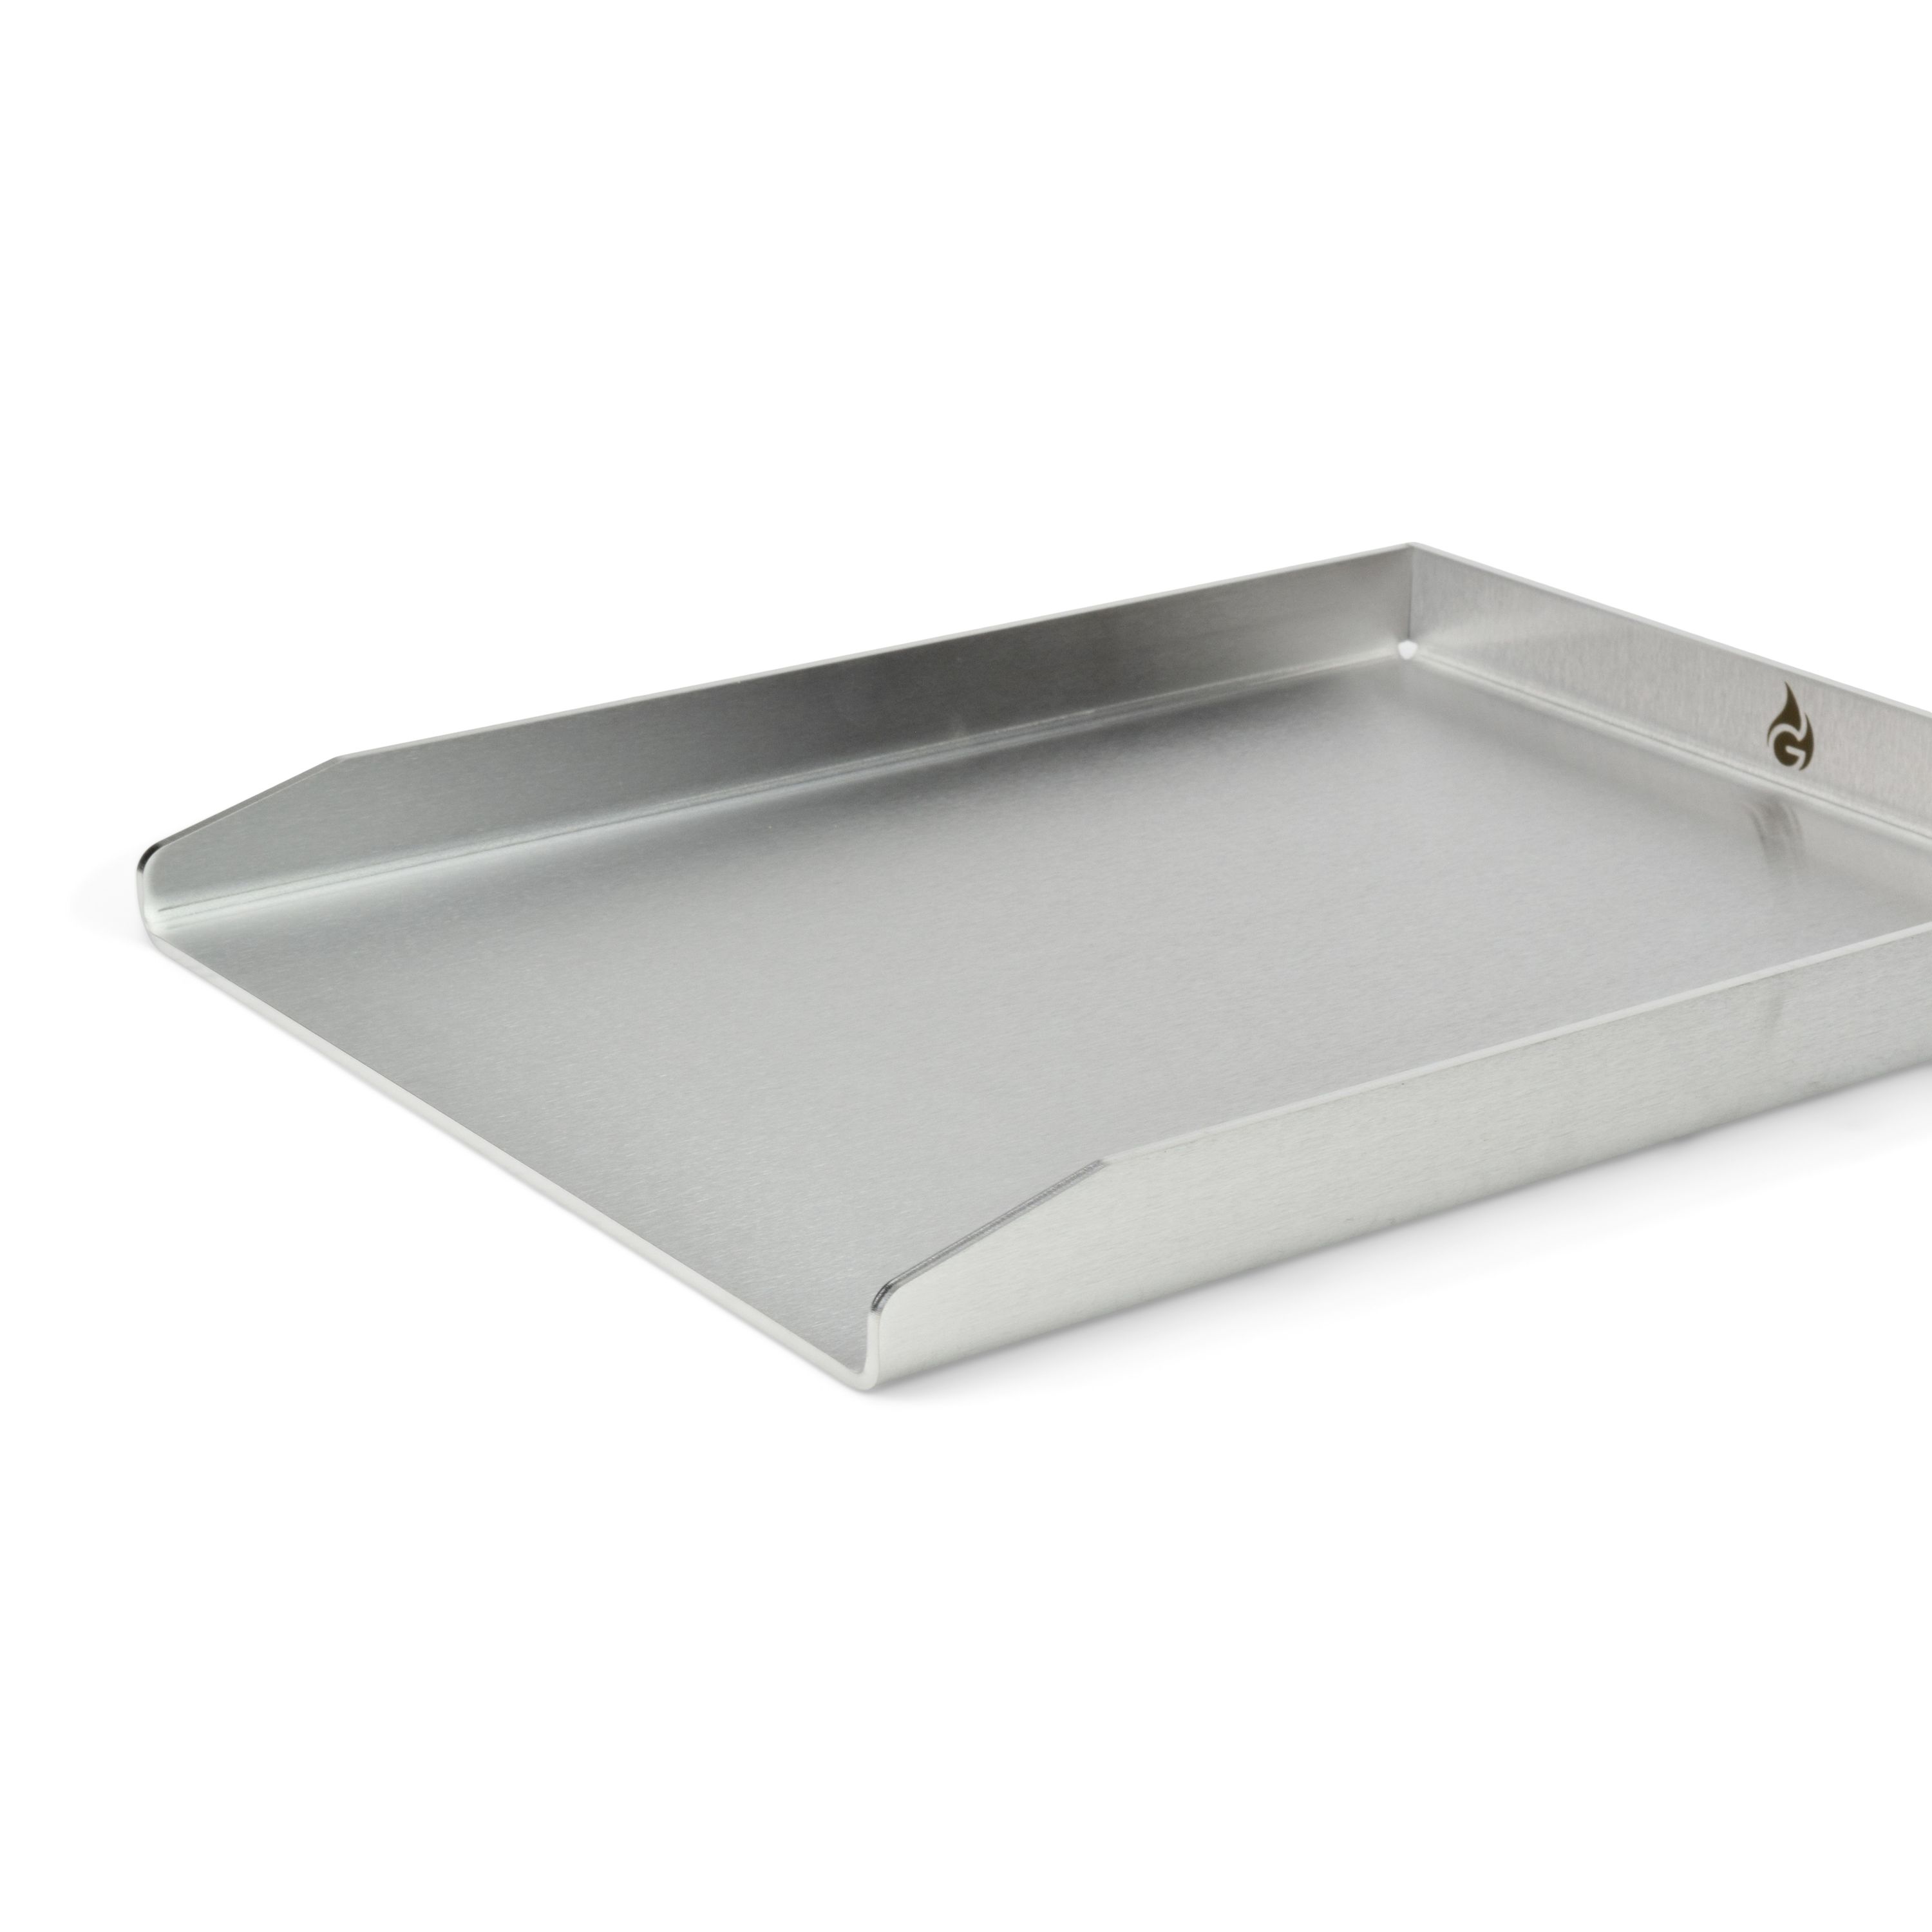 Stainless Steel Grill Plate - Plancha 43,5 x 34cm for Broil King Baron